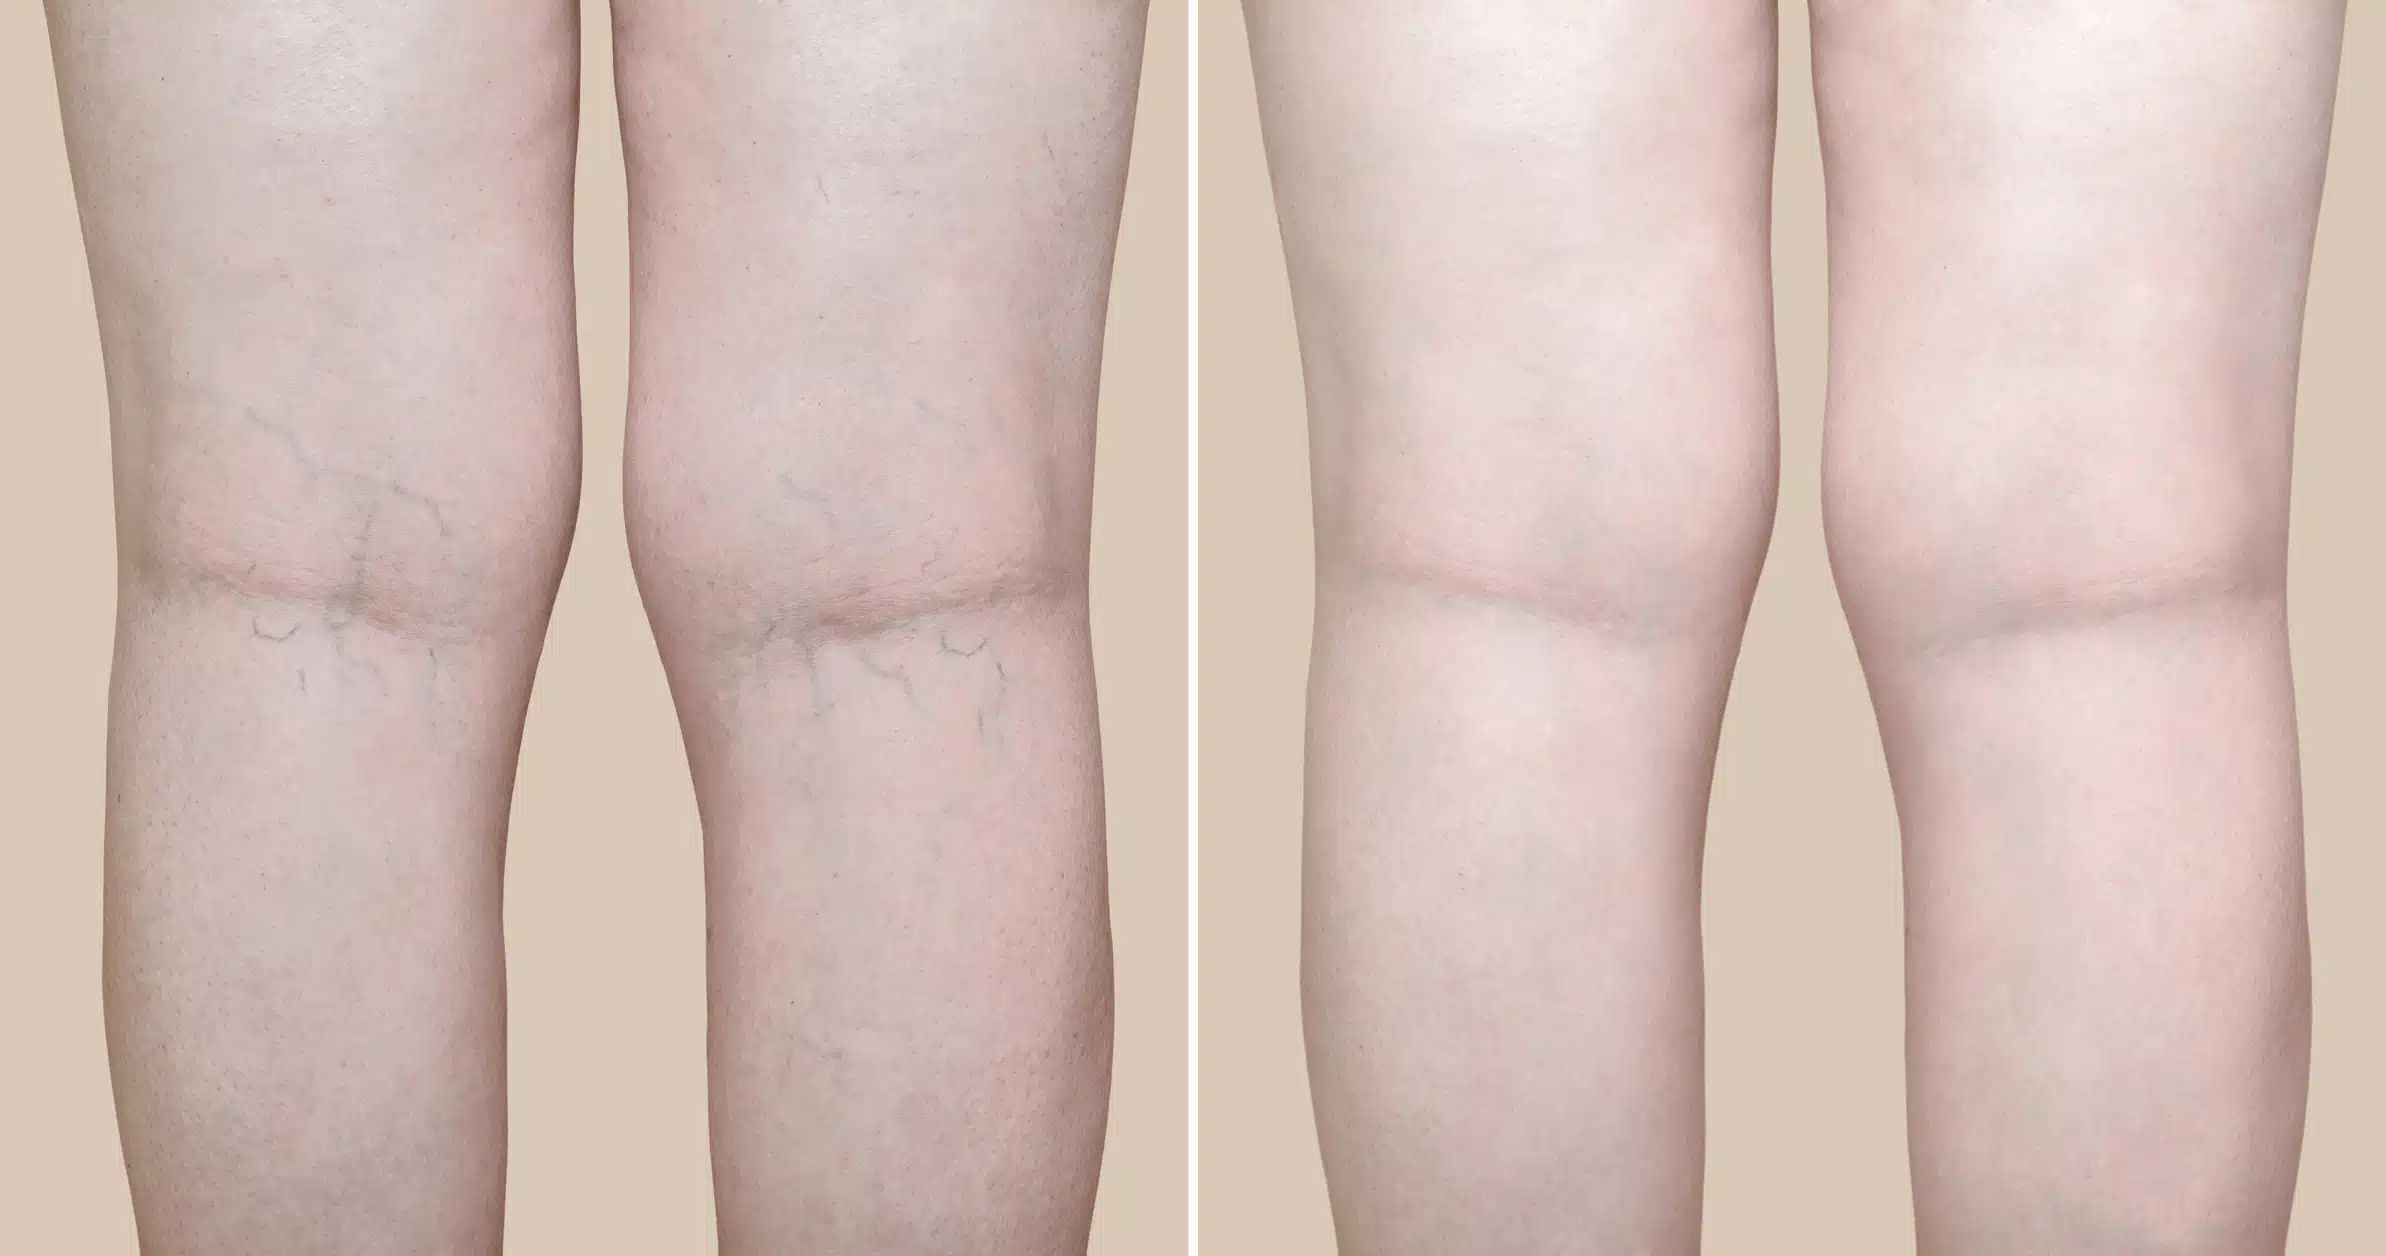 Sclerotherapy vs. Surgery